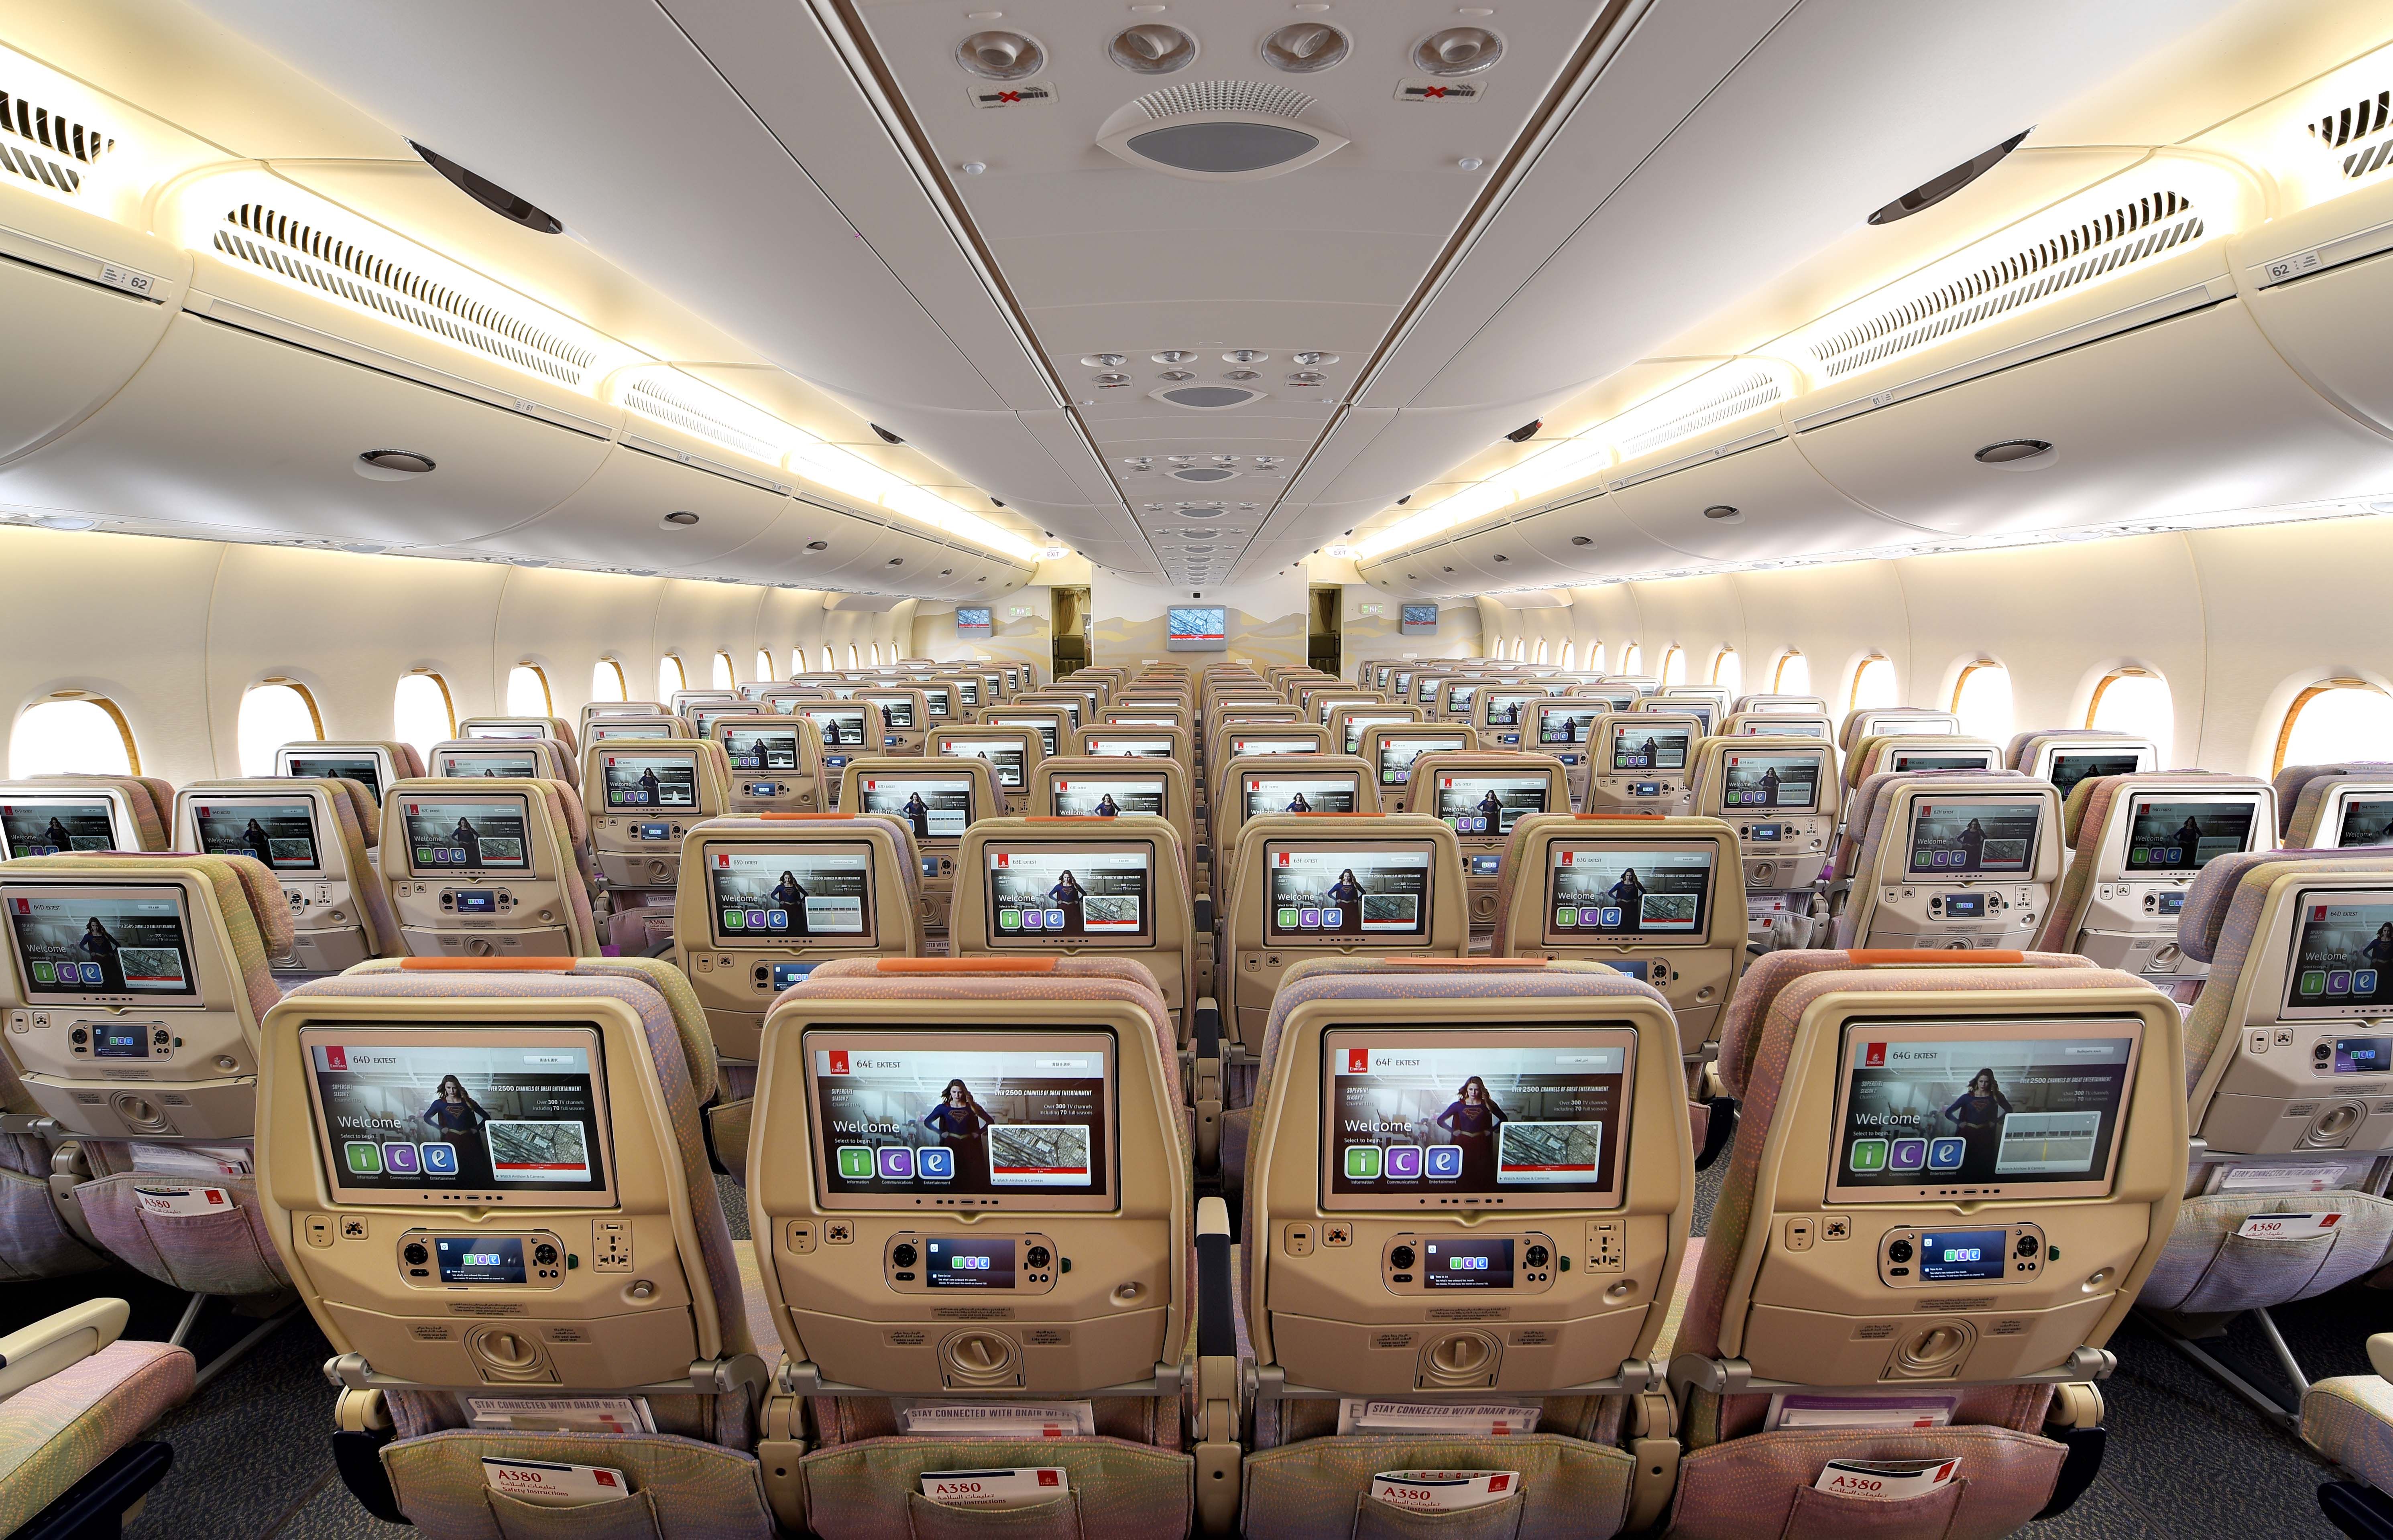 Wide shot of Emirates Economy cabin. All entertainment screens in the seats are in full view.